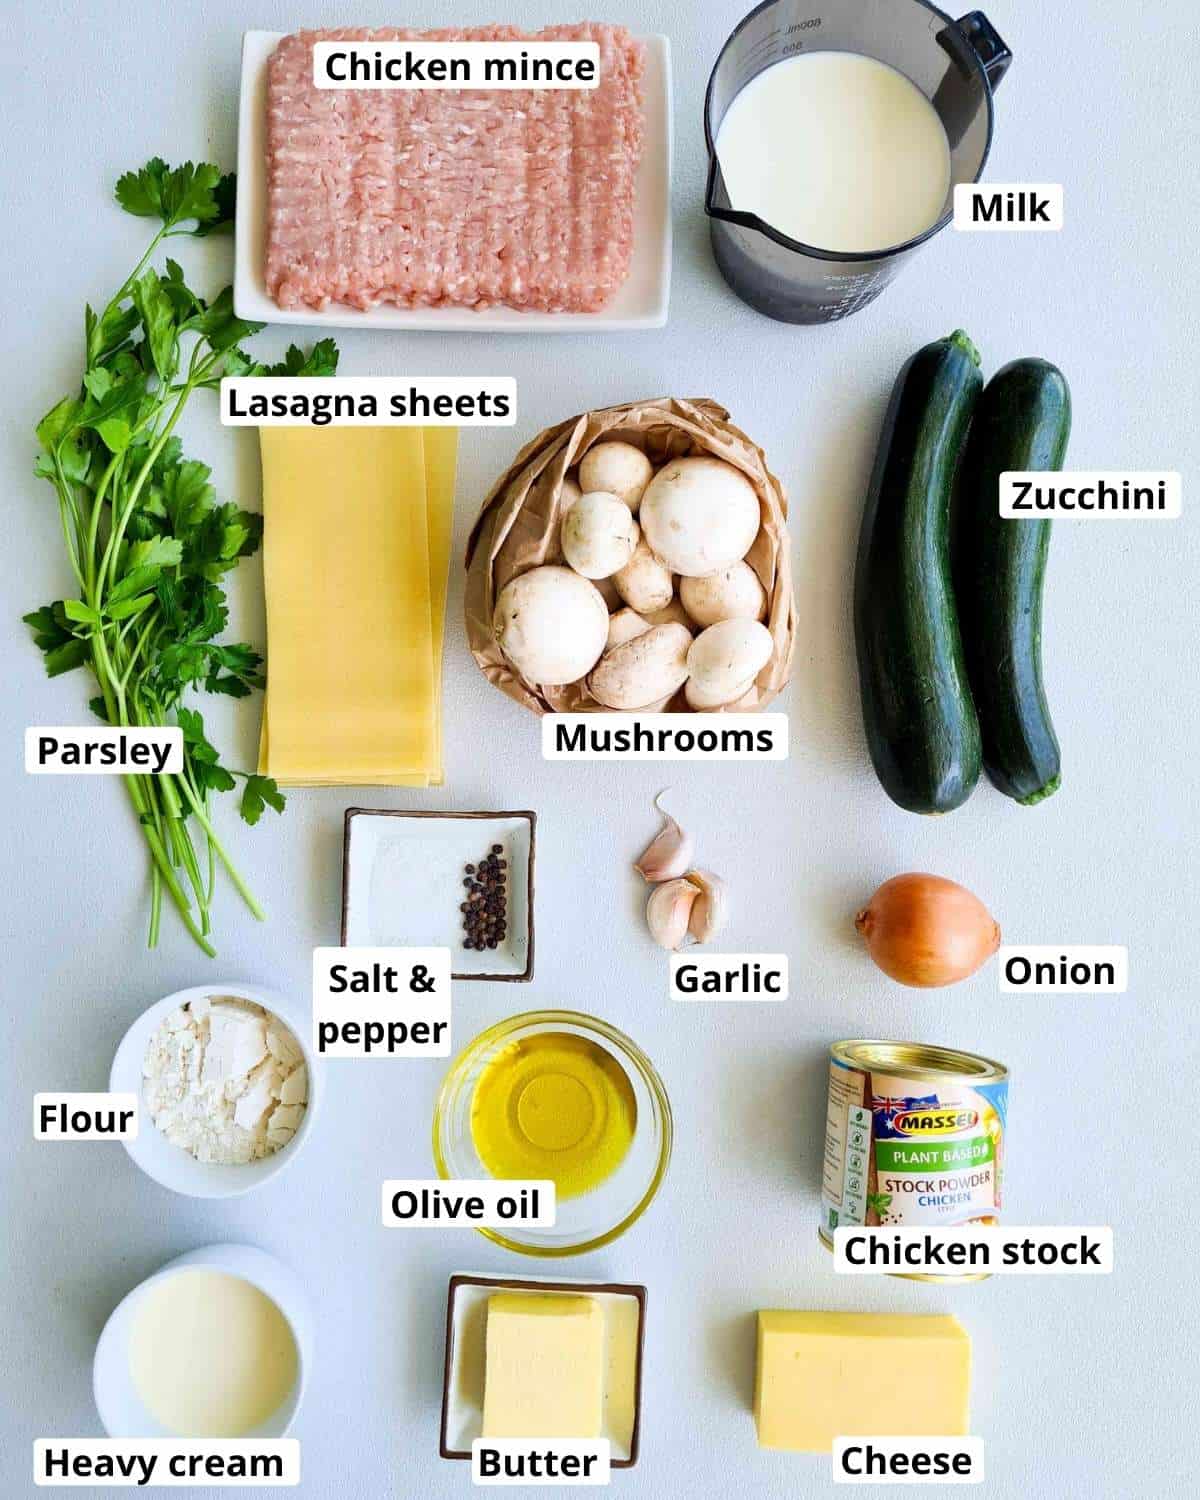 Ingredients required to make this recipe, labeled.